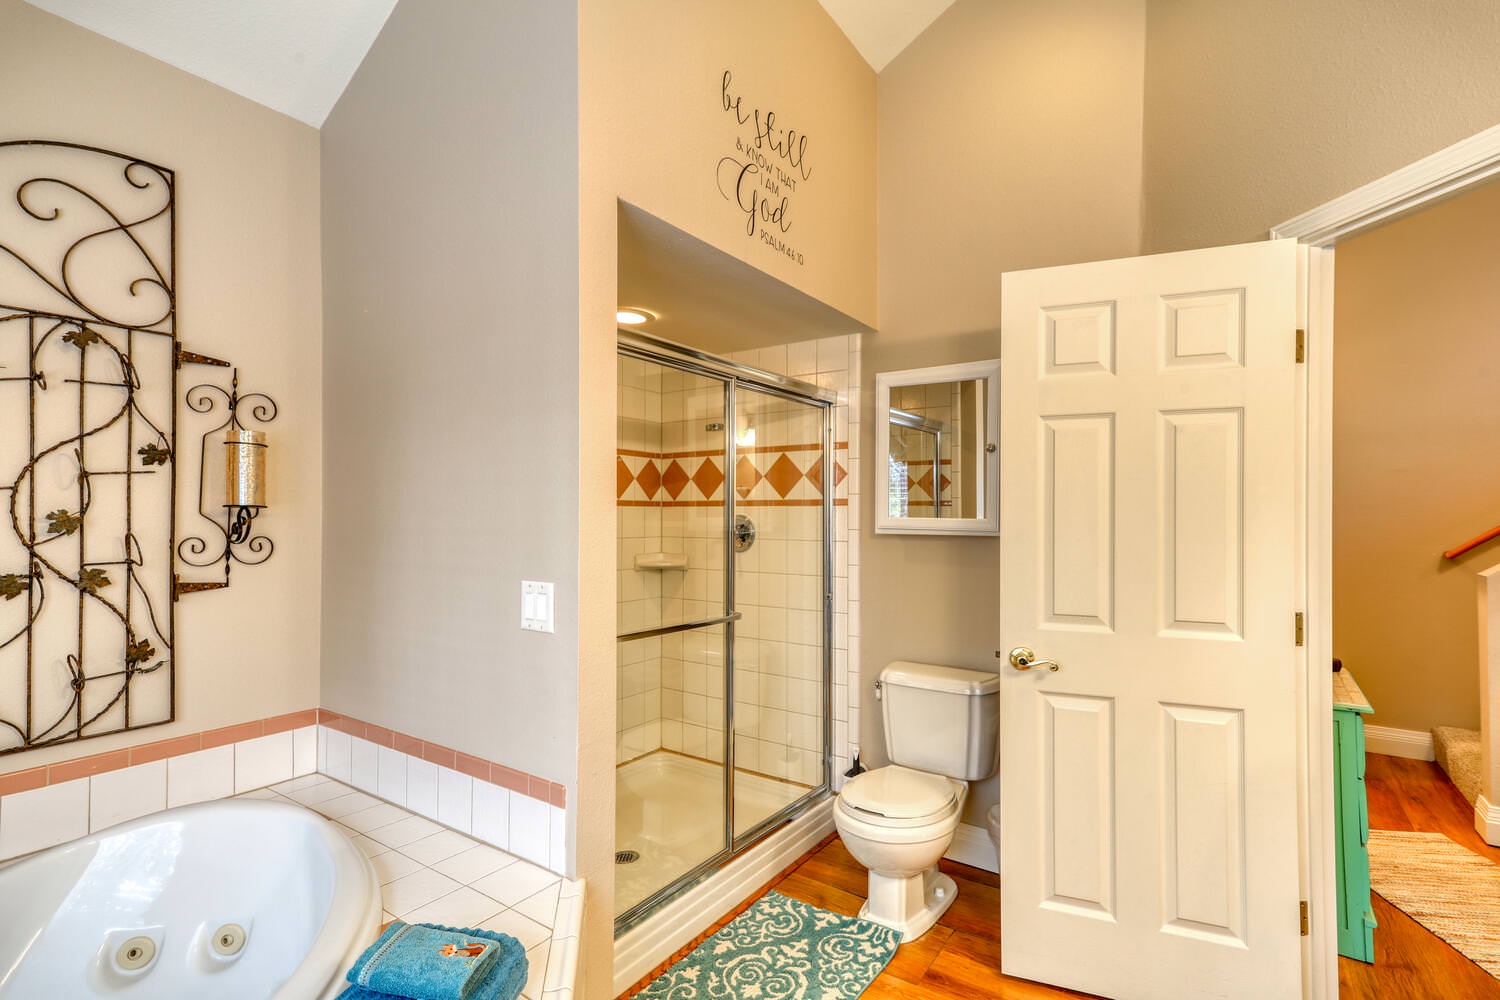 Large, walk-in shower stall in master bath